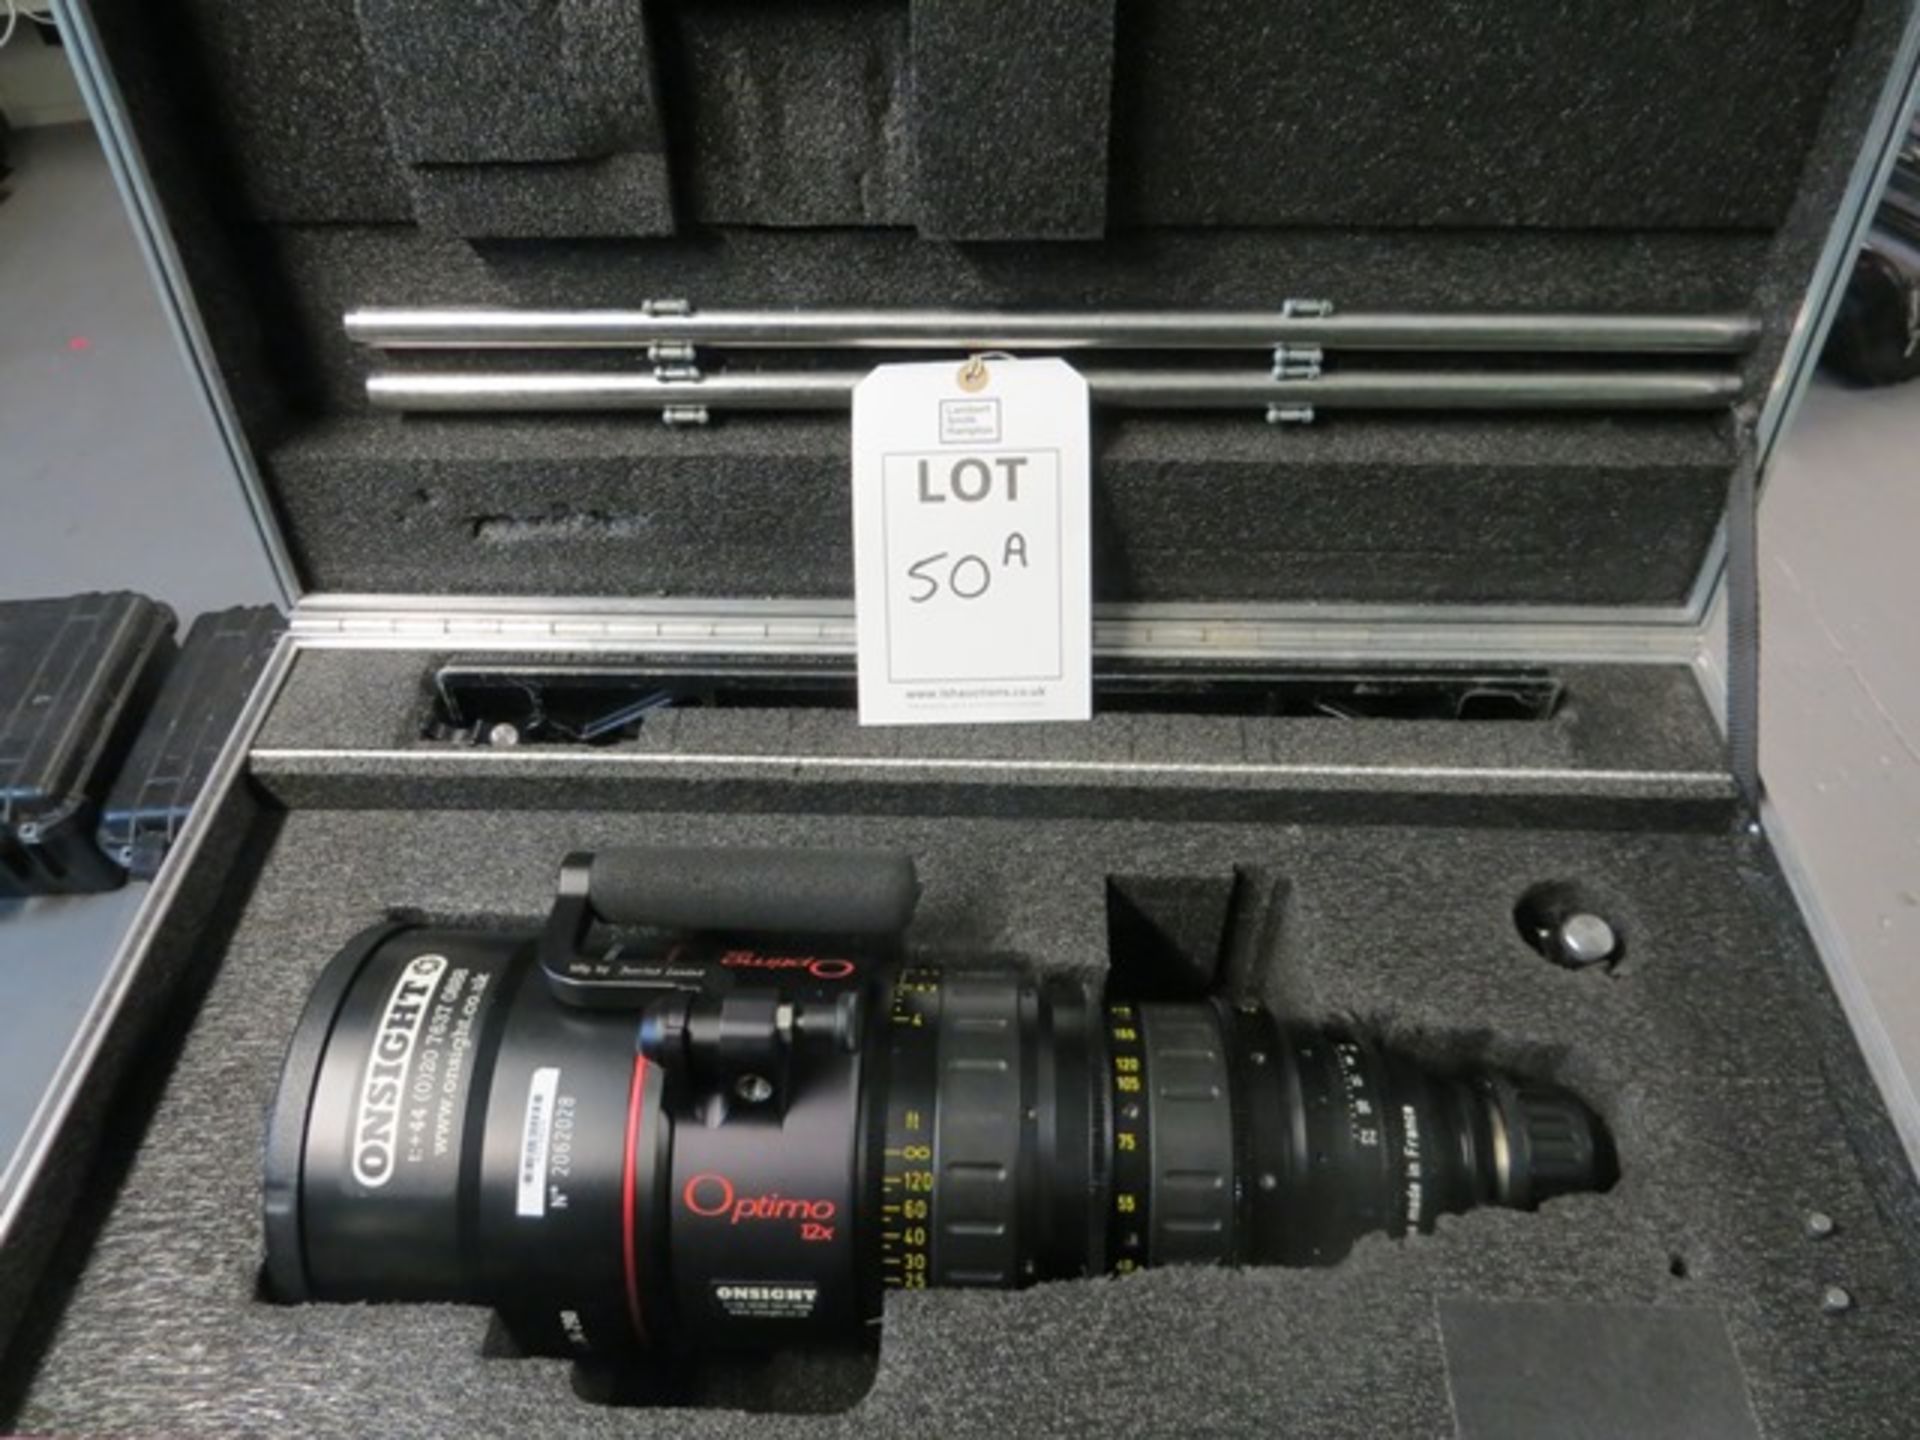 Angenieux F24 35mm Optimo 12X 24-290 PL Mount Feet Scale Zoom Lens s/n 2062028